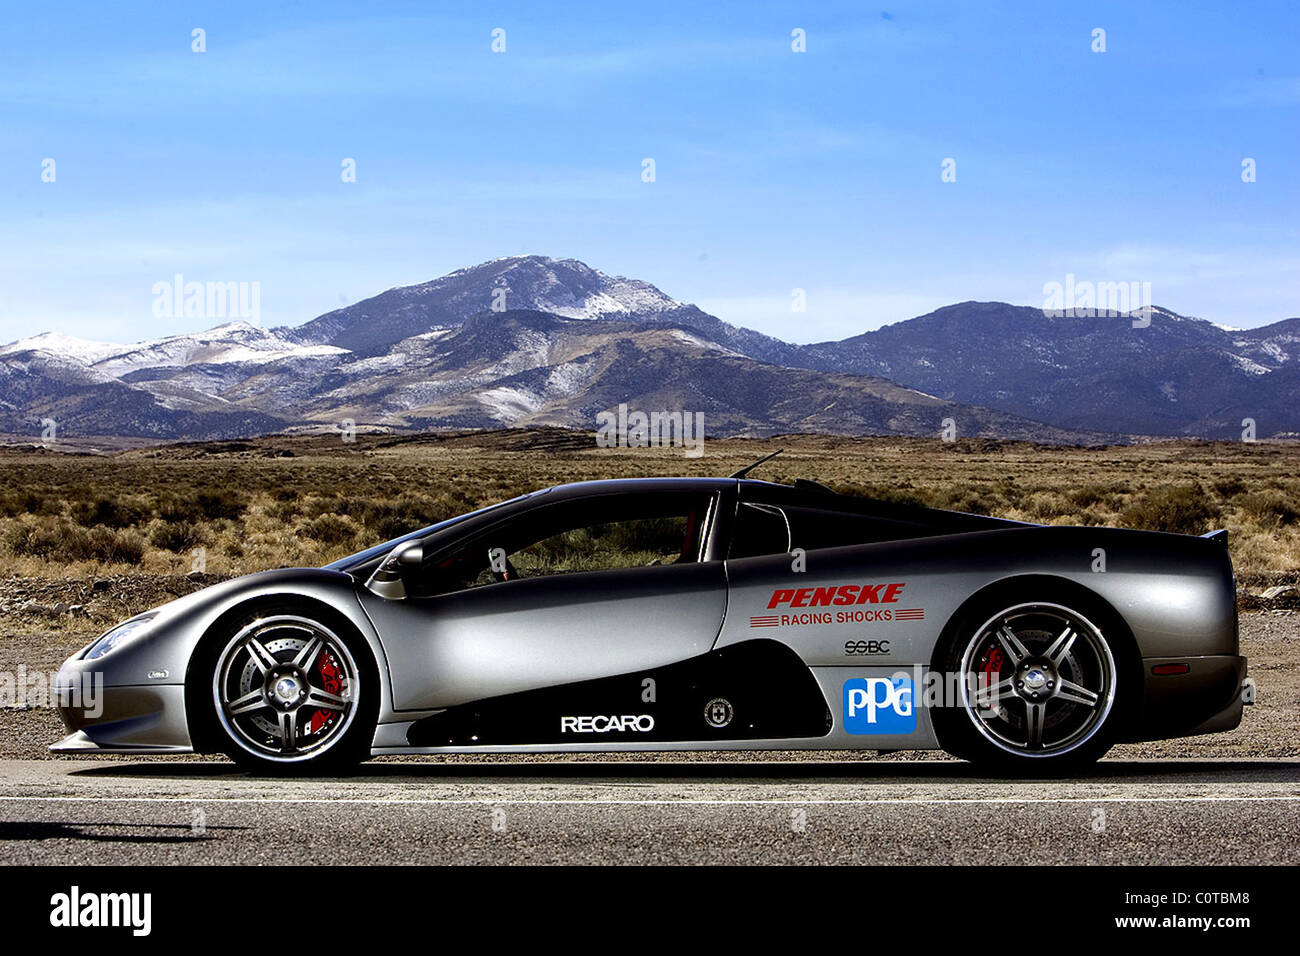 Ultimate Aero EV: Shelby Supercars (SSC) is currently developing an amazing project, the Ultimate Aero EV will be one of the Stock Photo